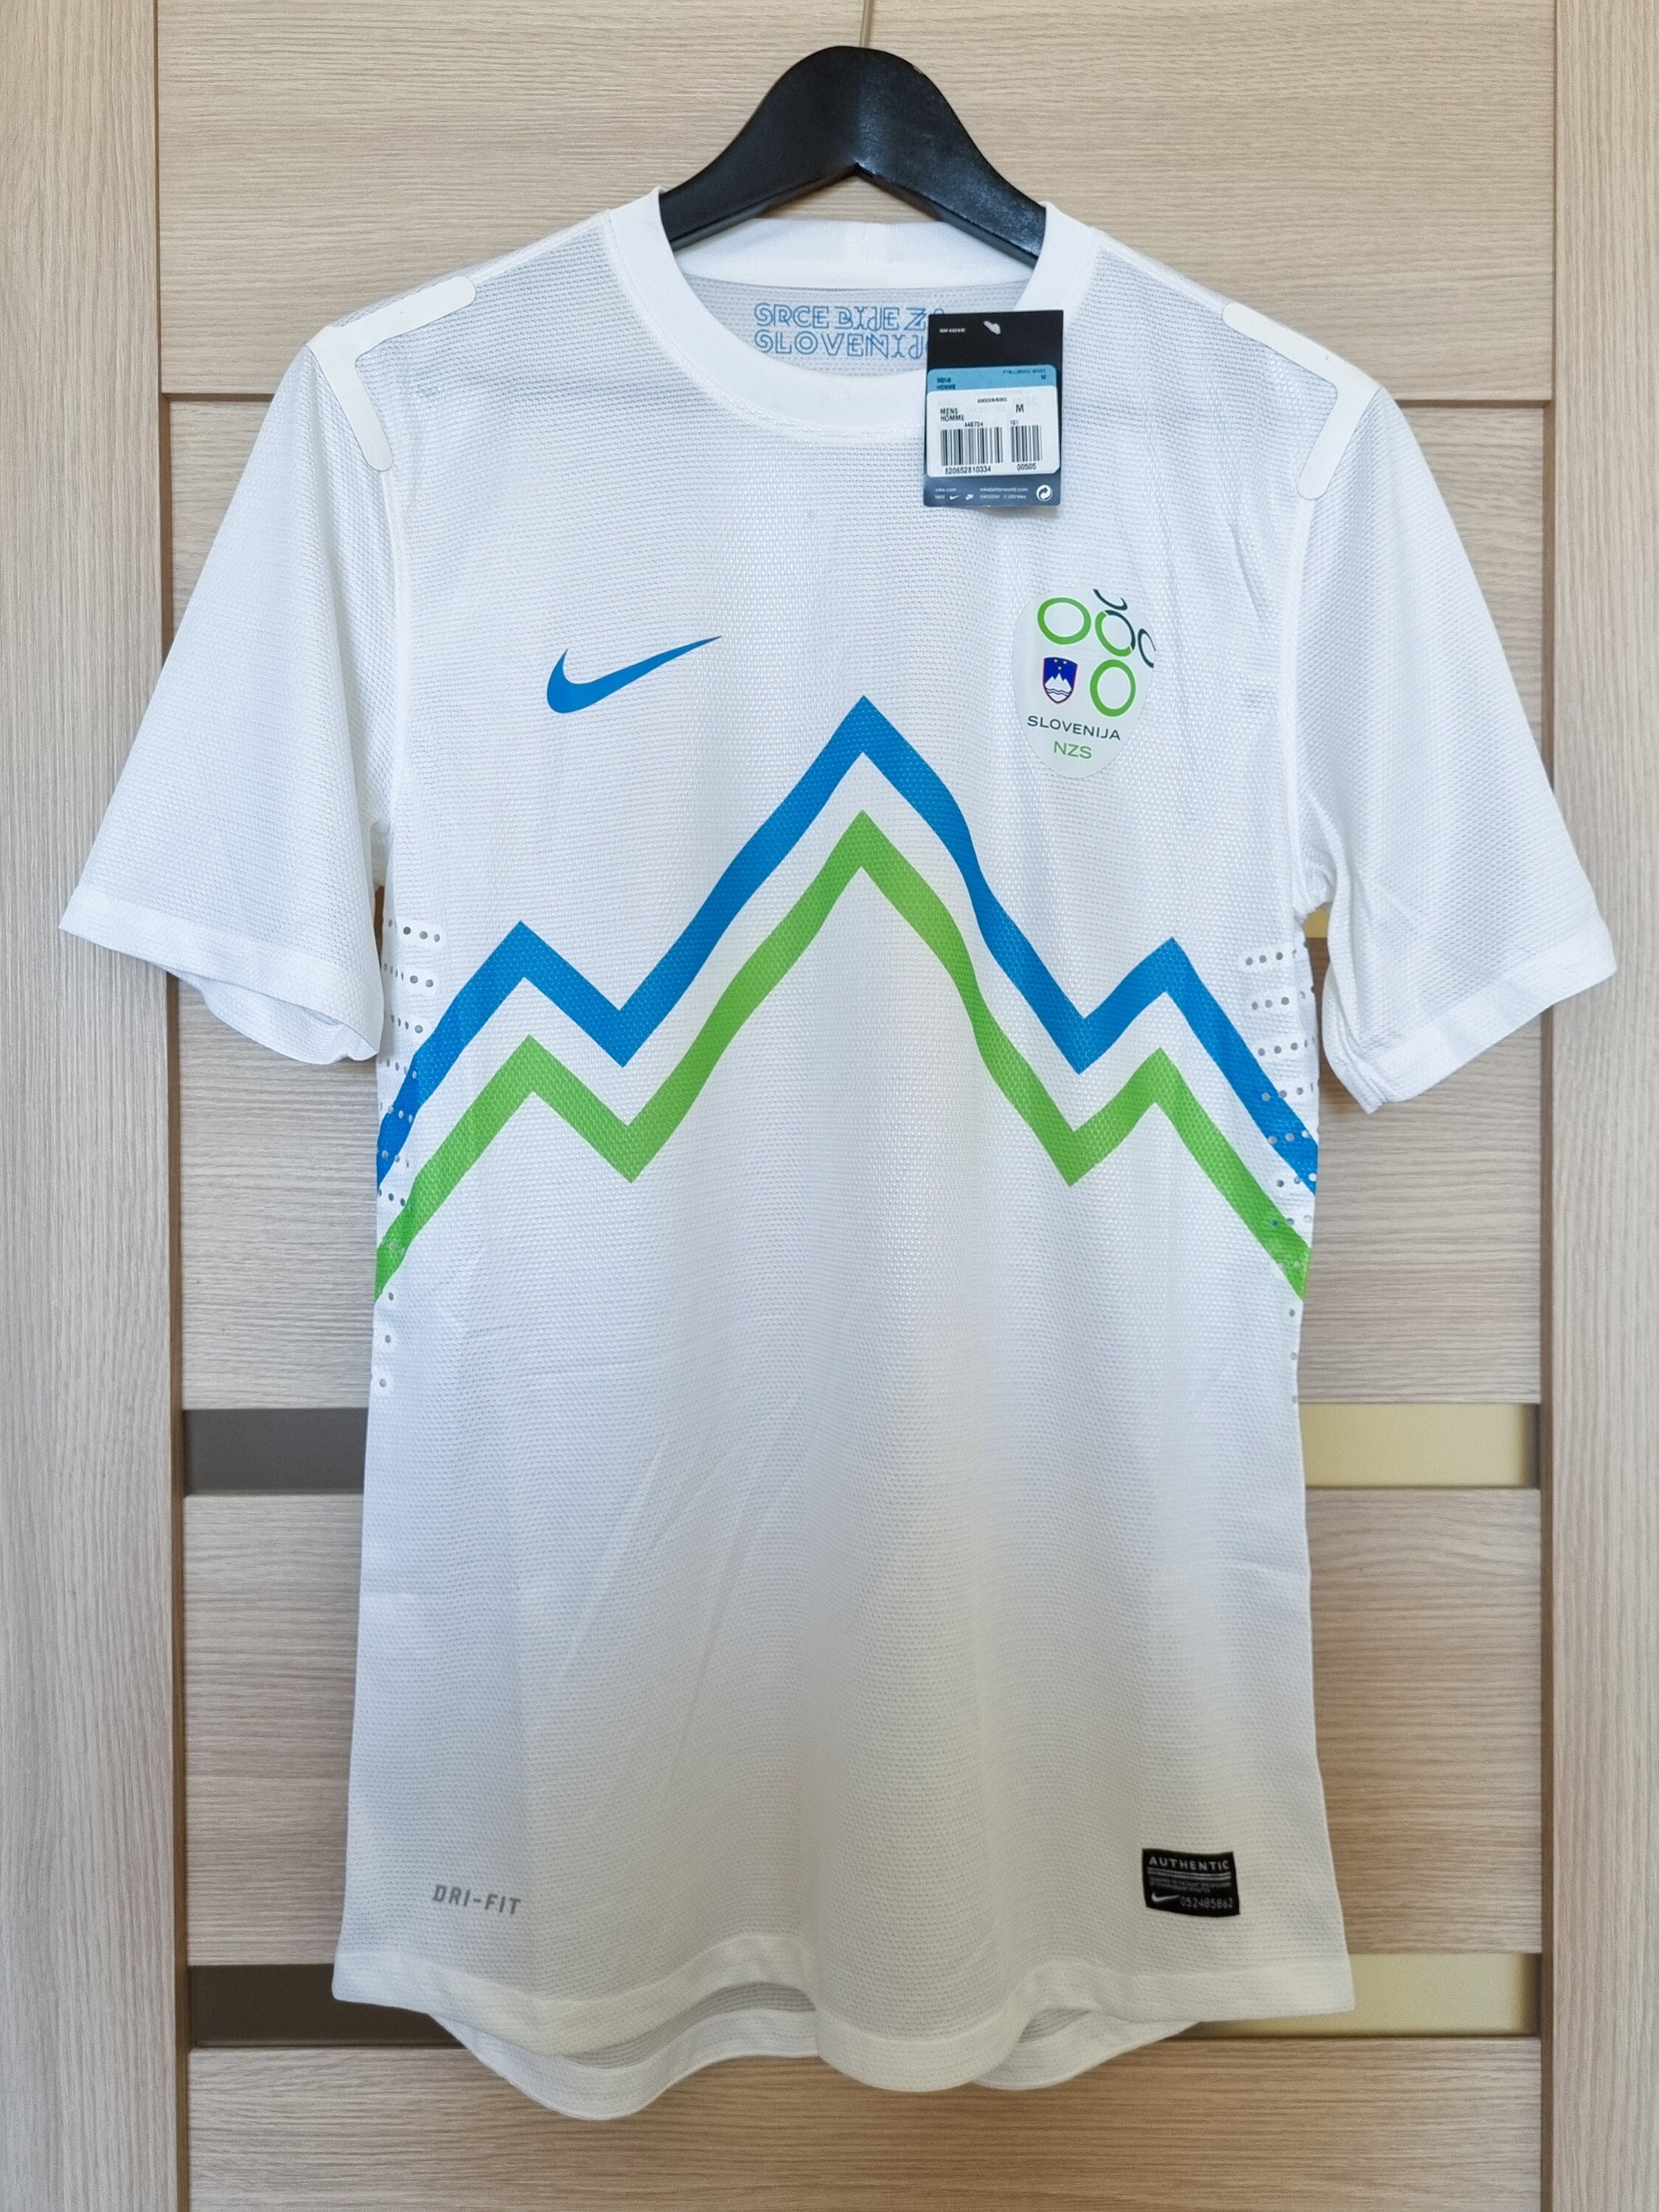 Slovenia 2014 Home and Away Kits Released  Sports uniform design, Sports jersey  design, Soccer shirts